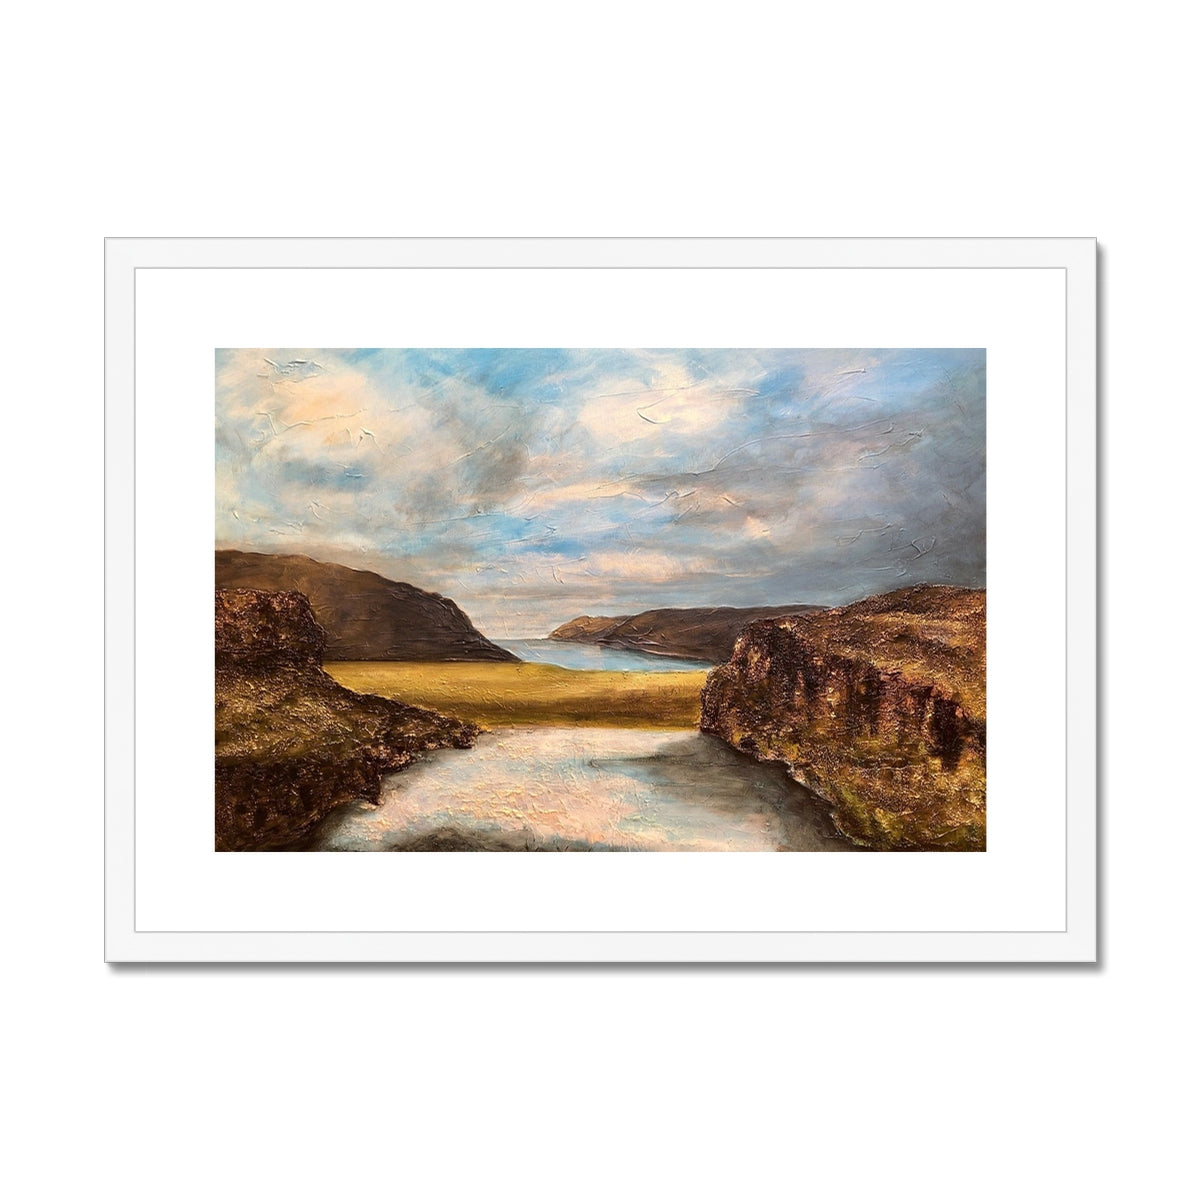 Westfjords Iceland Painting | Framed & Mounted Prints From Scotland-Framed & Mounted Prints-World Art Gallery-A2 Landscape-White Frame-Paintings, Prints, Homeware, Art Gifts From Scotland By Scottish Artist Kevin Hunter